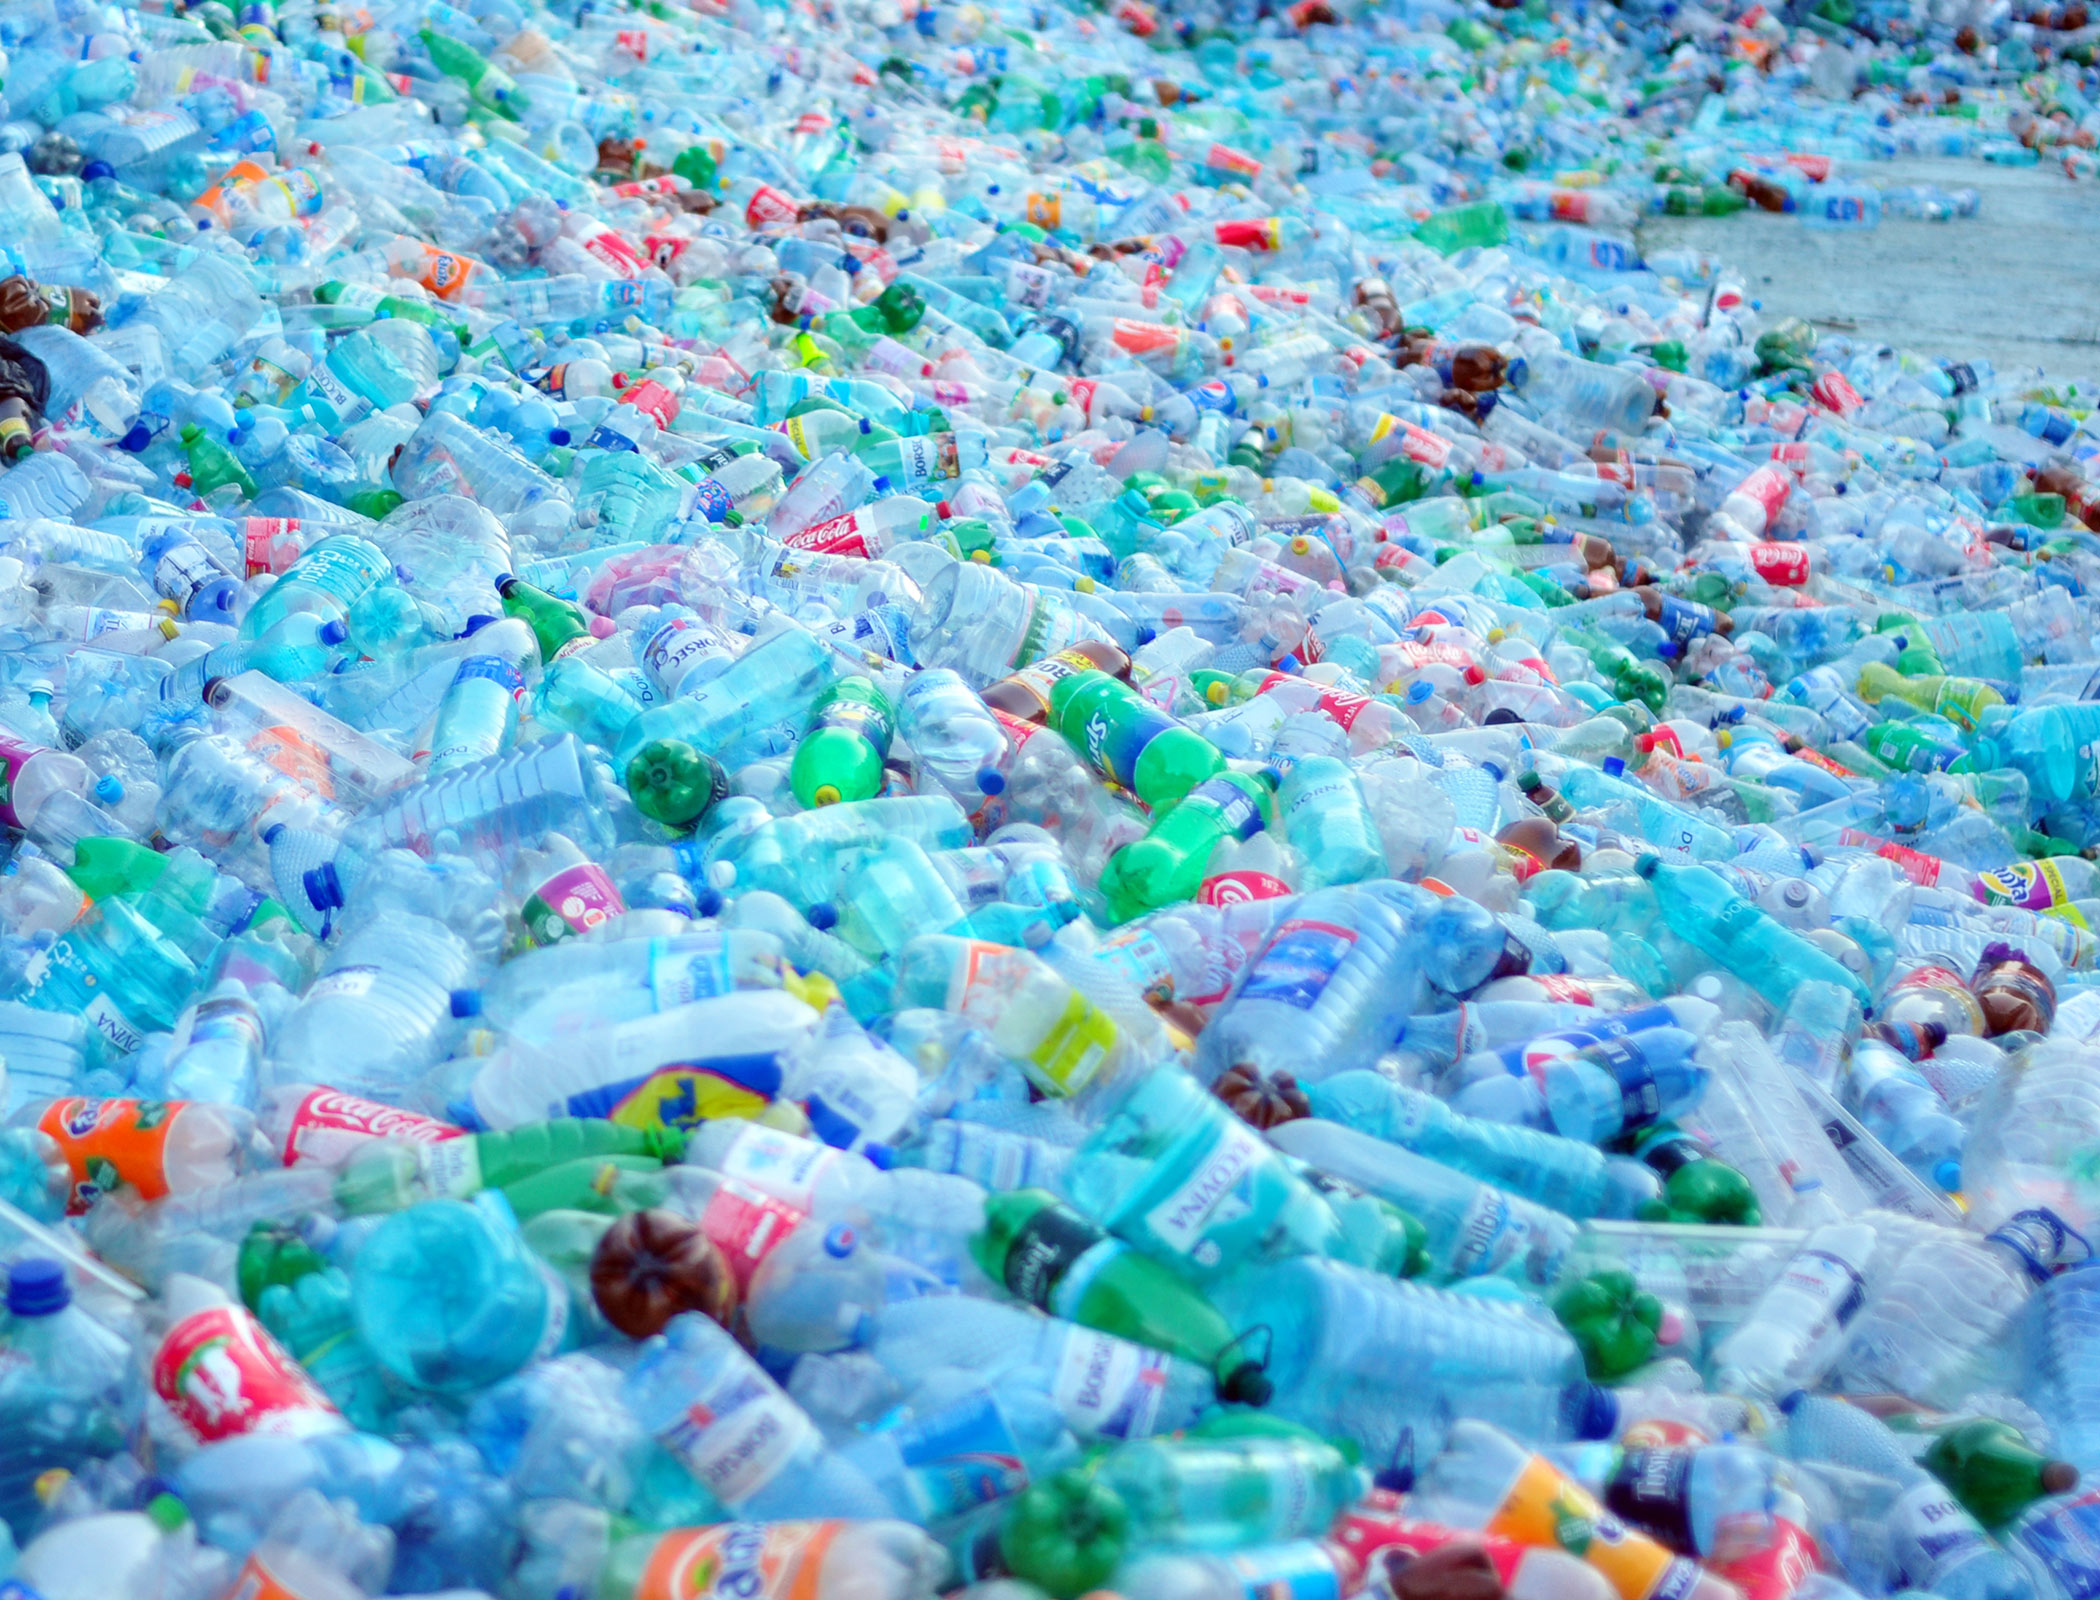 Recycling pledges from major firms have not reduced plastic use